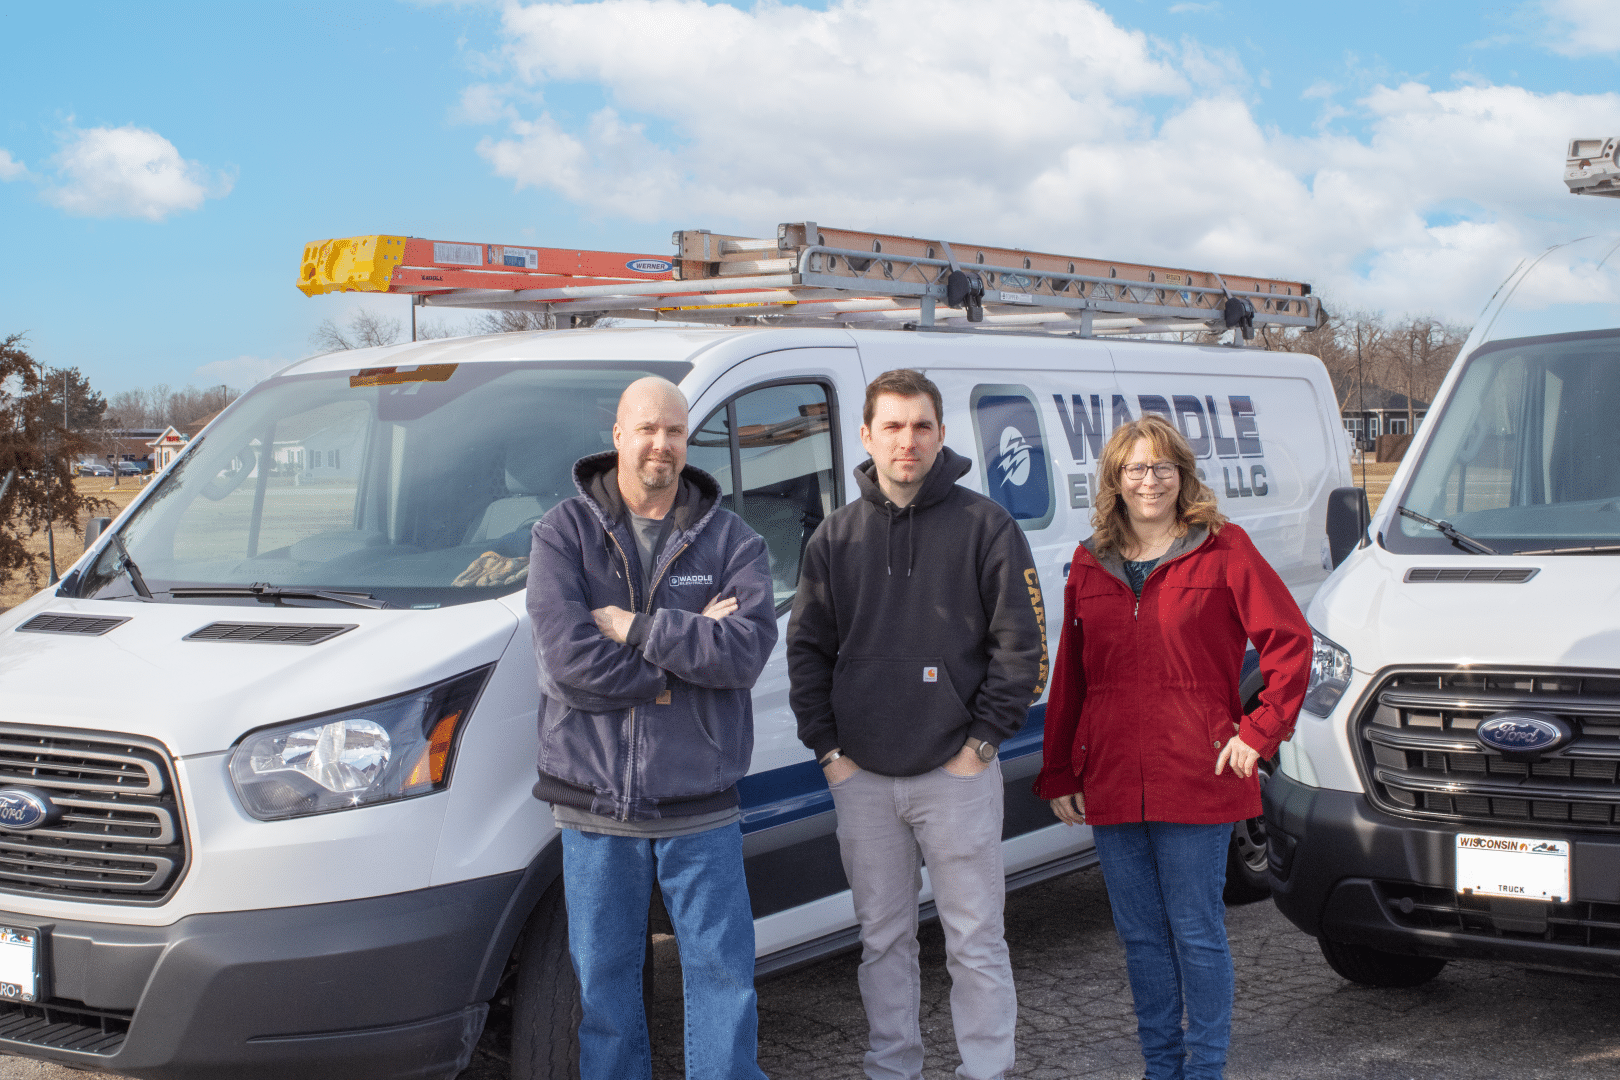 waddle electric, electricians in racine, electrician in racine